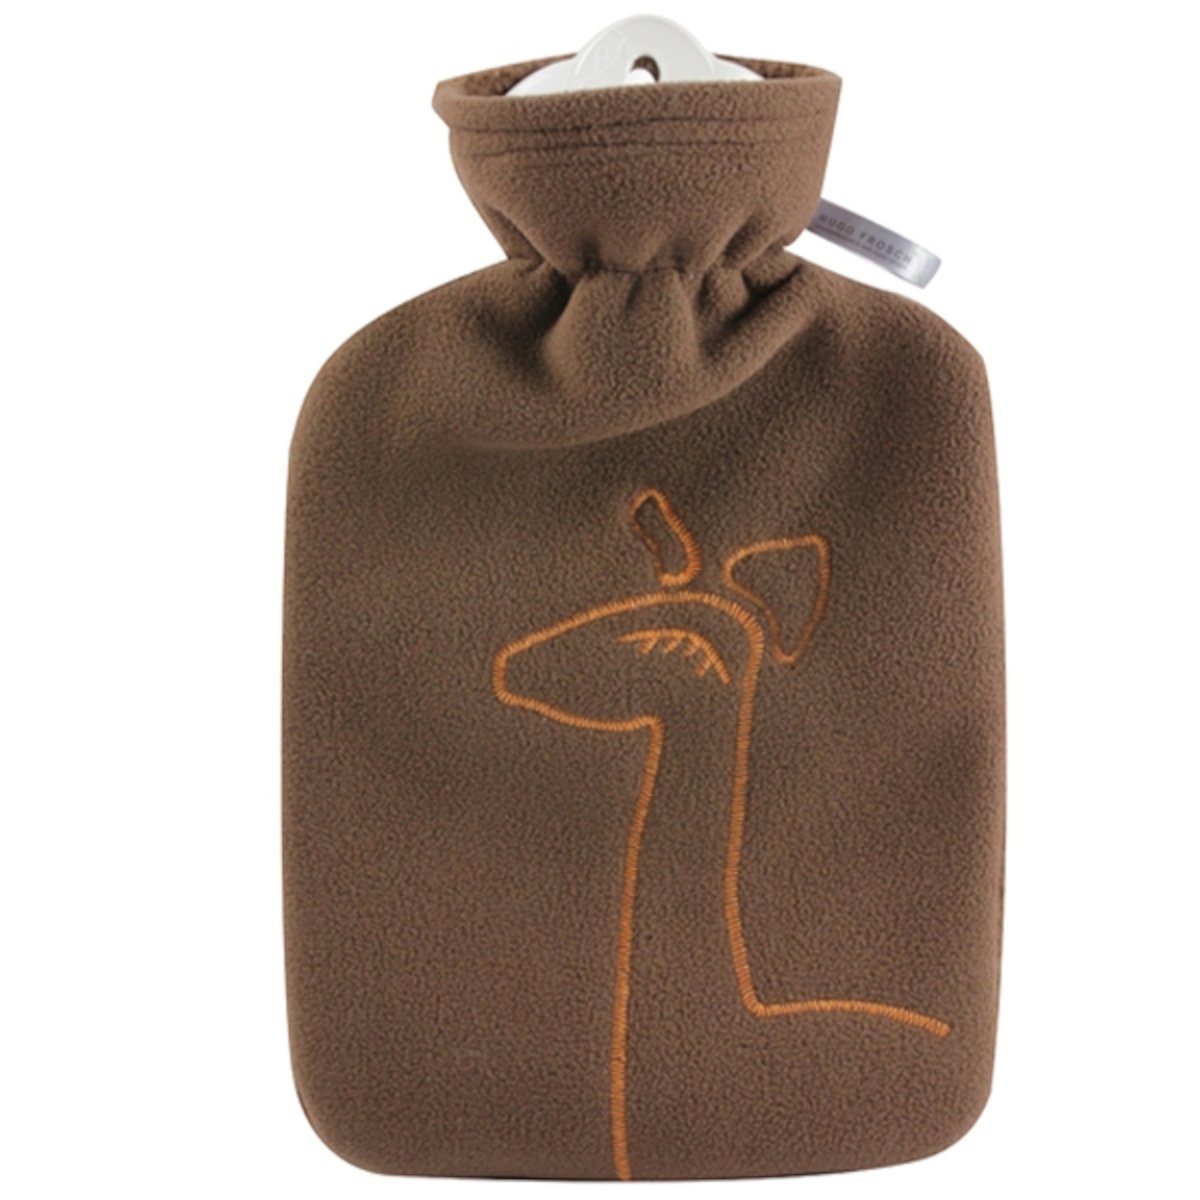 Hot Water Bottle Classic with Cover, Double Fleece - Brown Giraffe